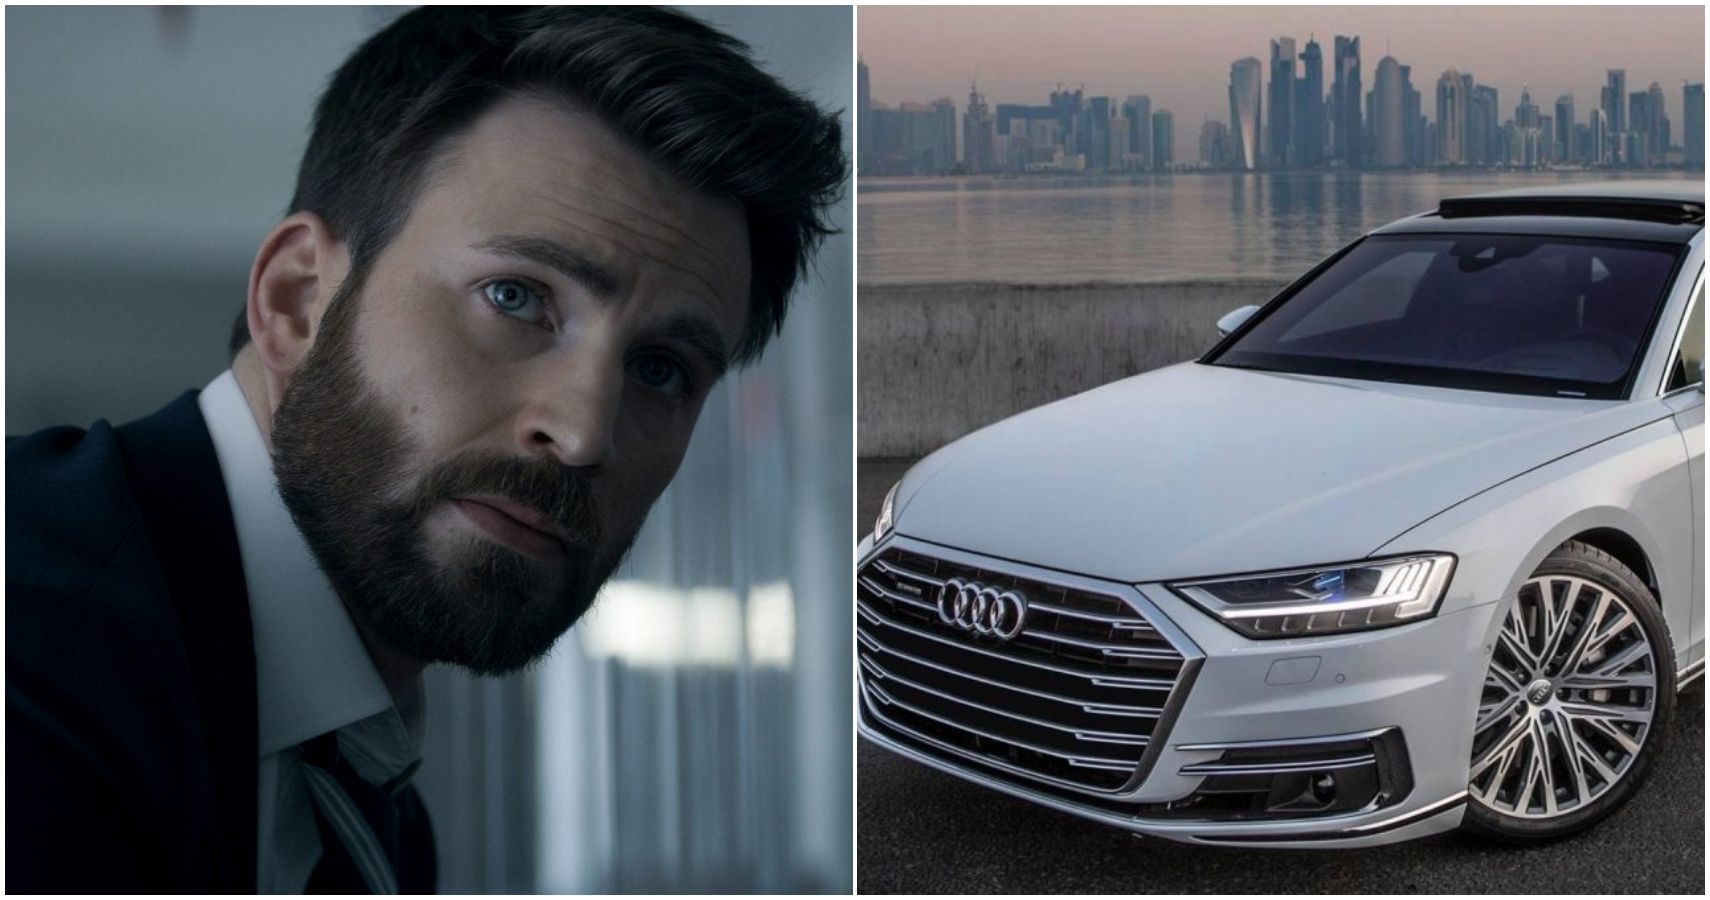 A Collage Of Chris Evans And The Audi A8 L